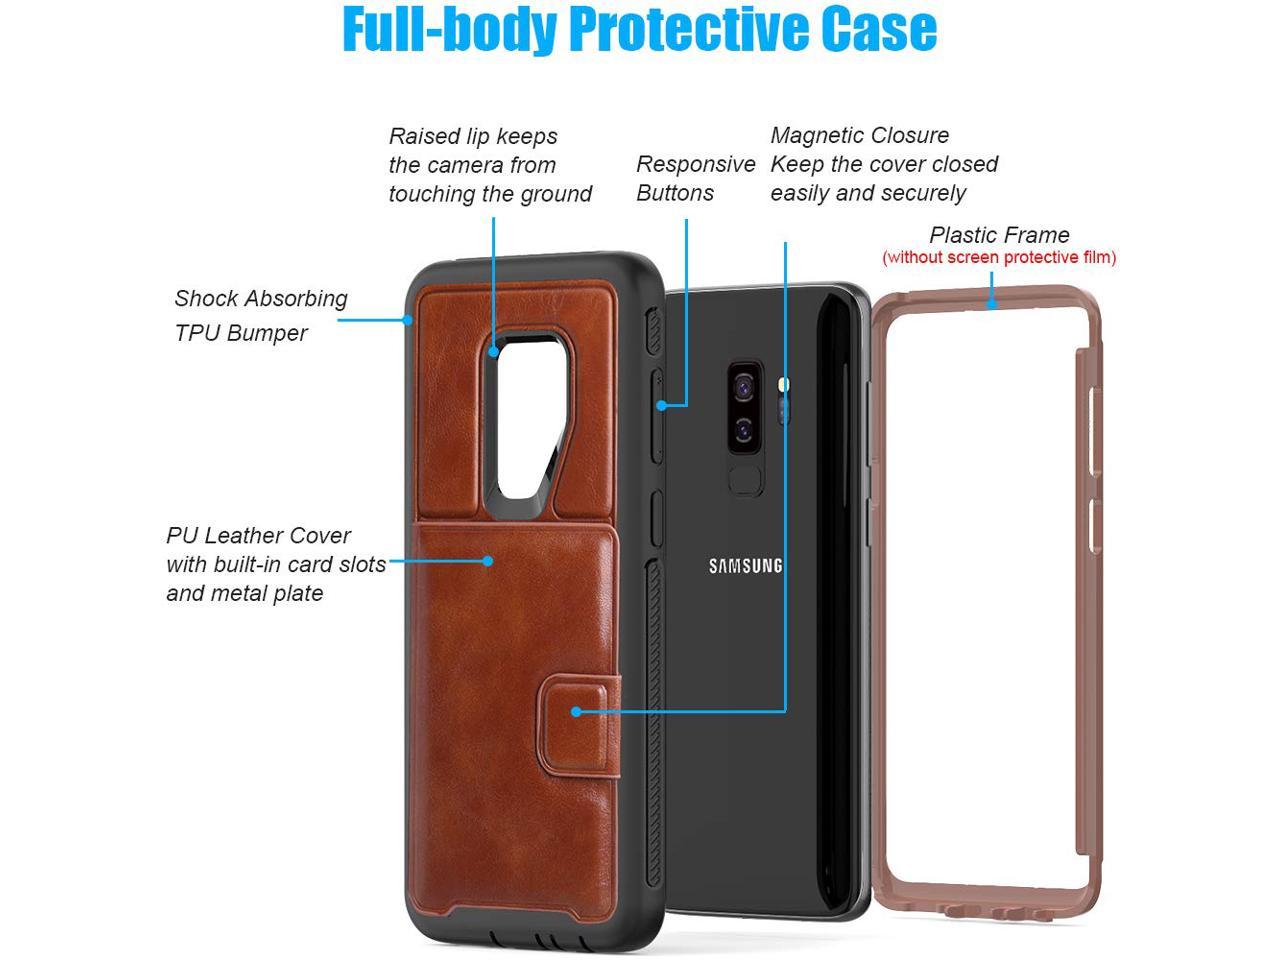 Leather Cover Business Gifts Wallet with Extra Waterproof Underwater Case Flip Case for Samsung Galaxy S9 Plus